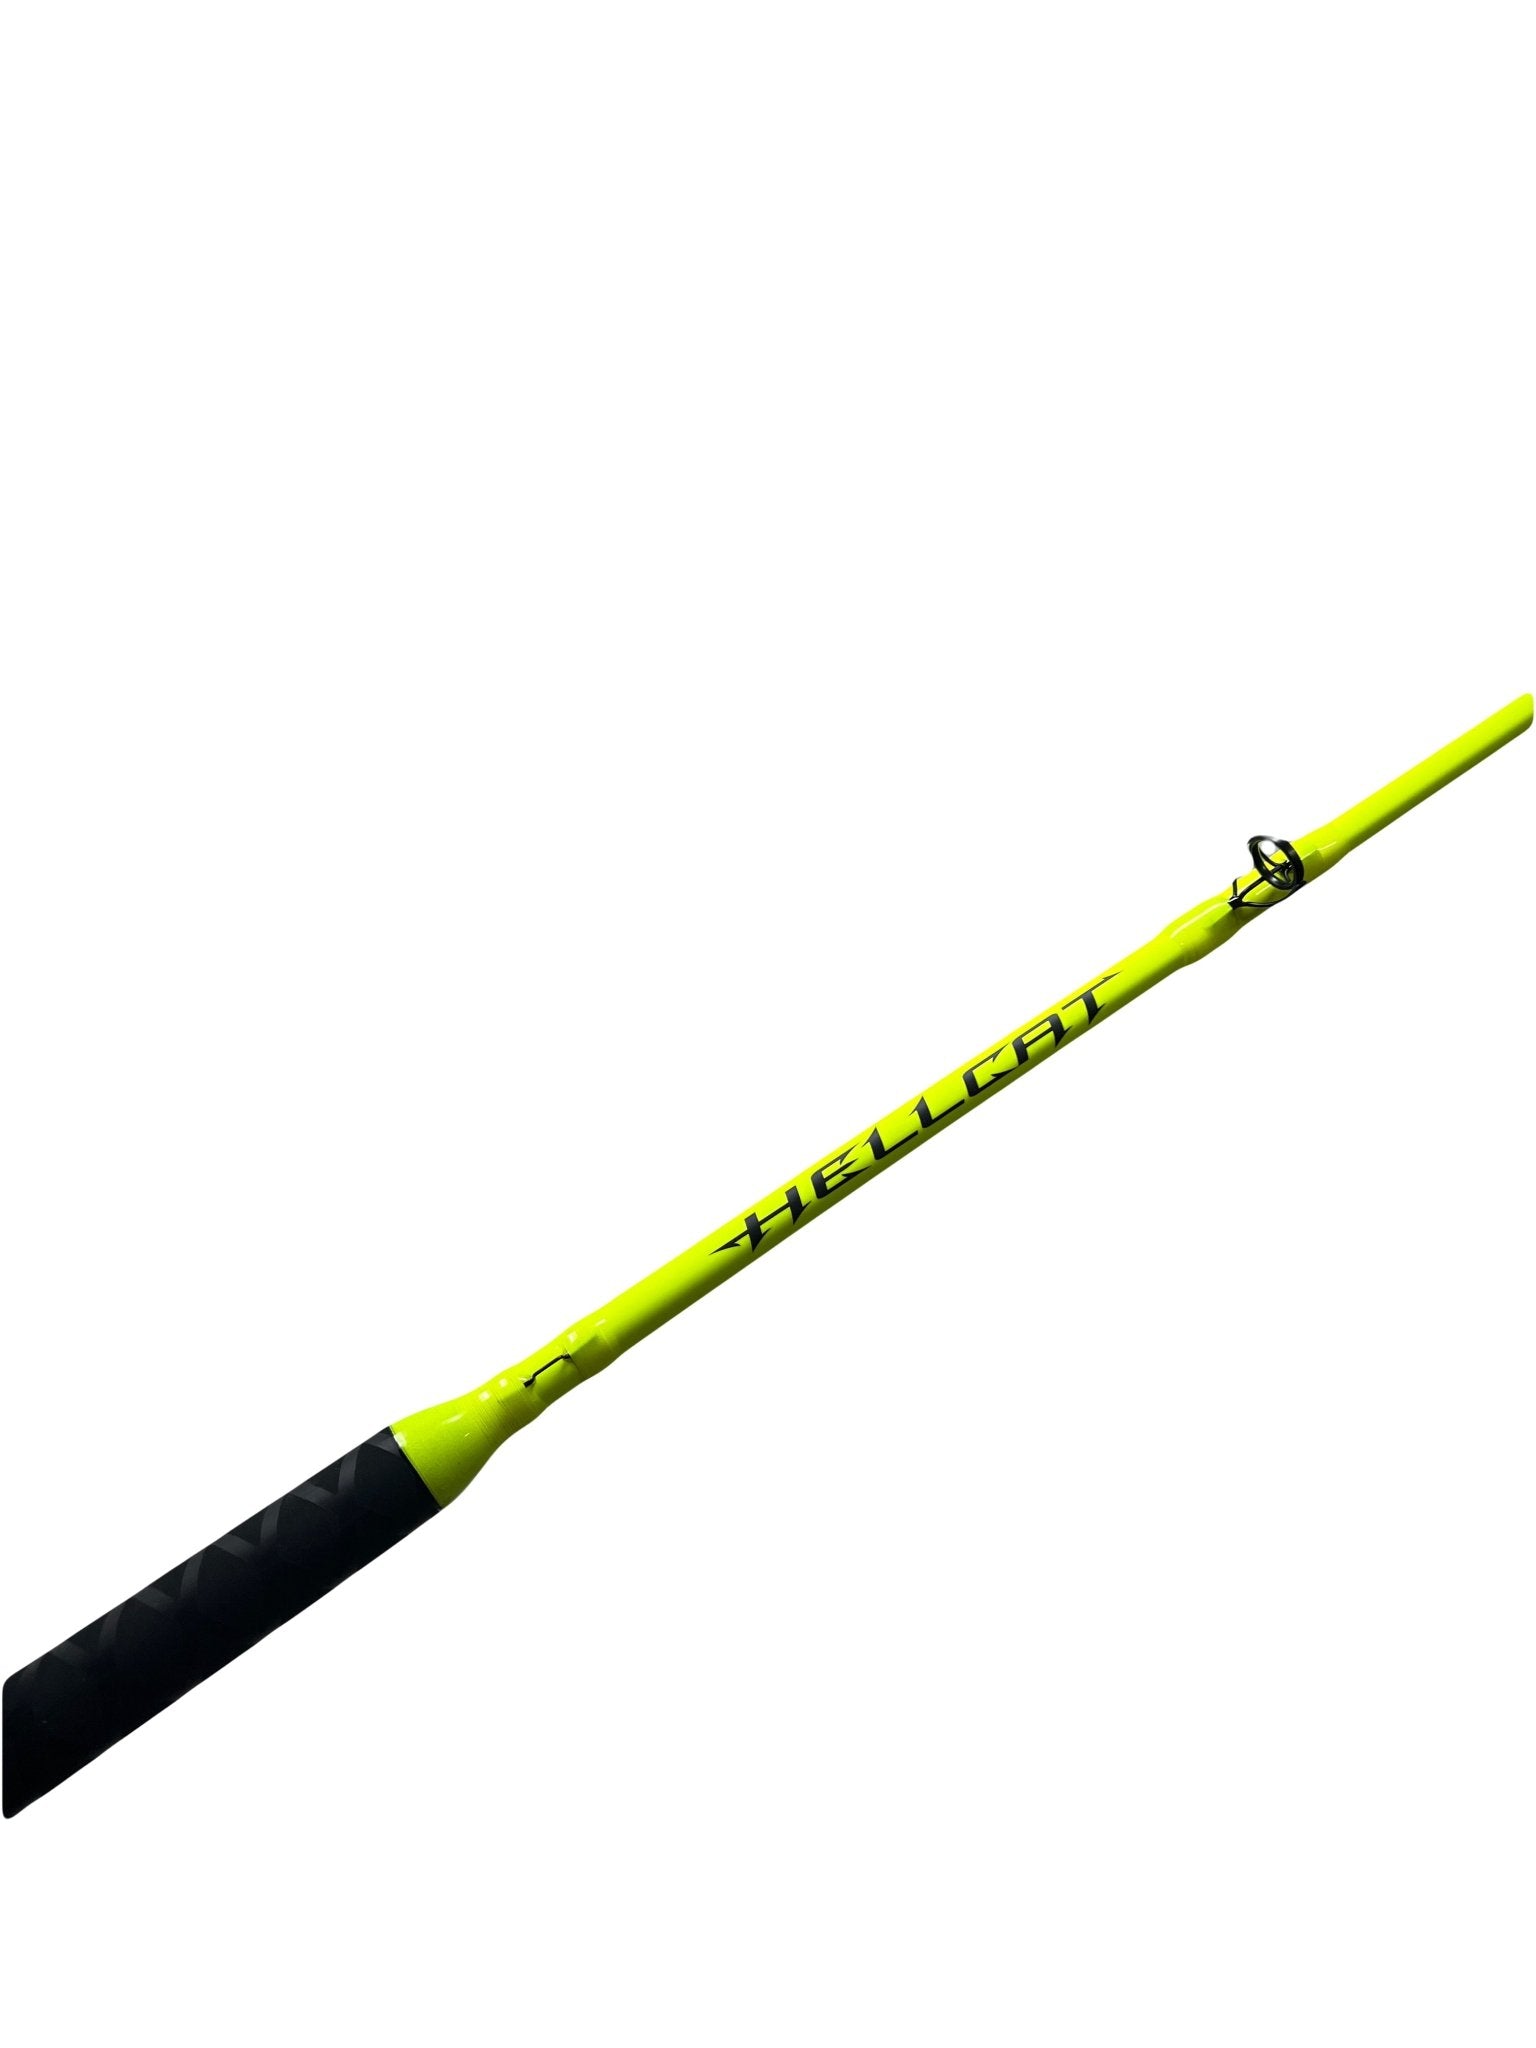 Catch the Fever 7'6 Yellow Hellcat Casting Rod 